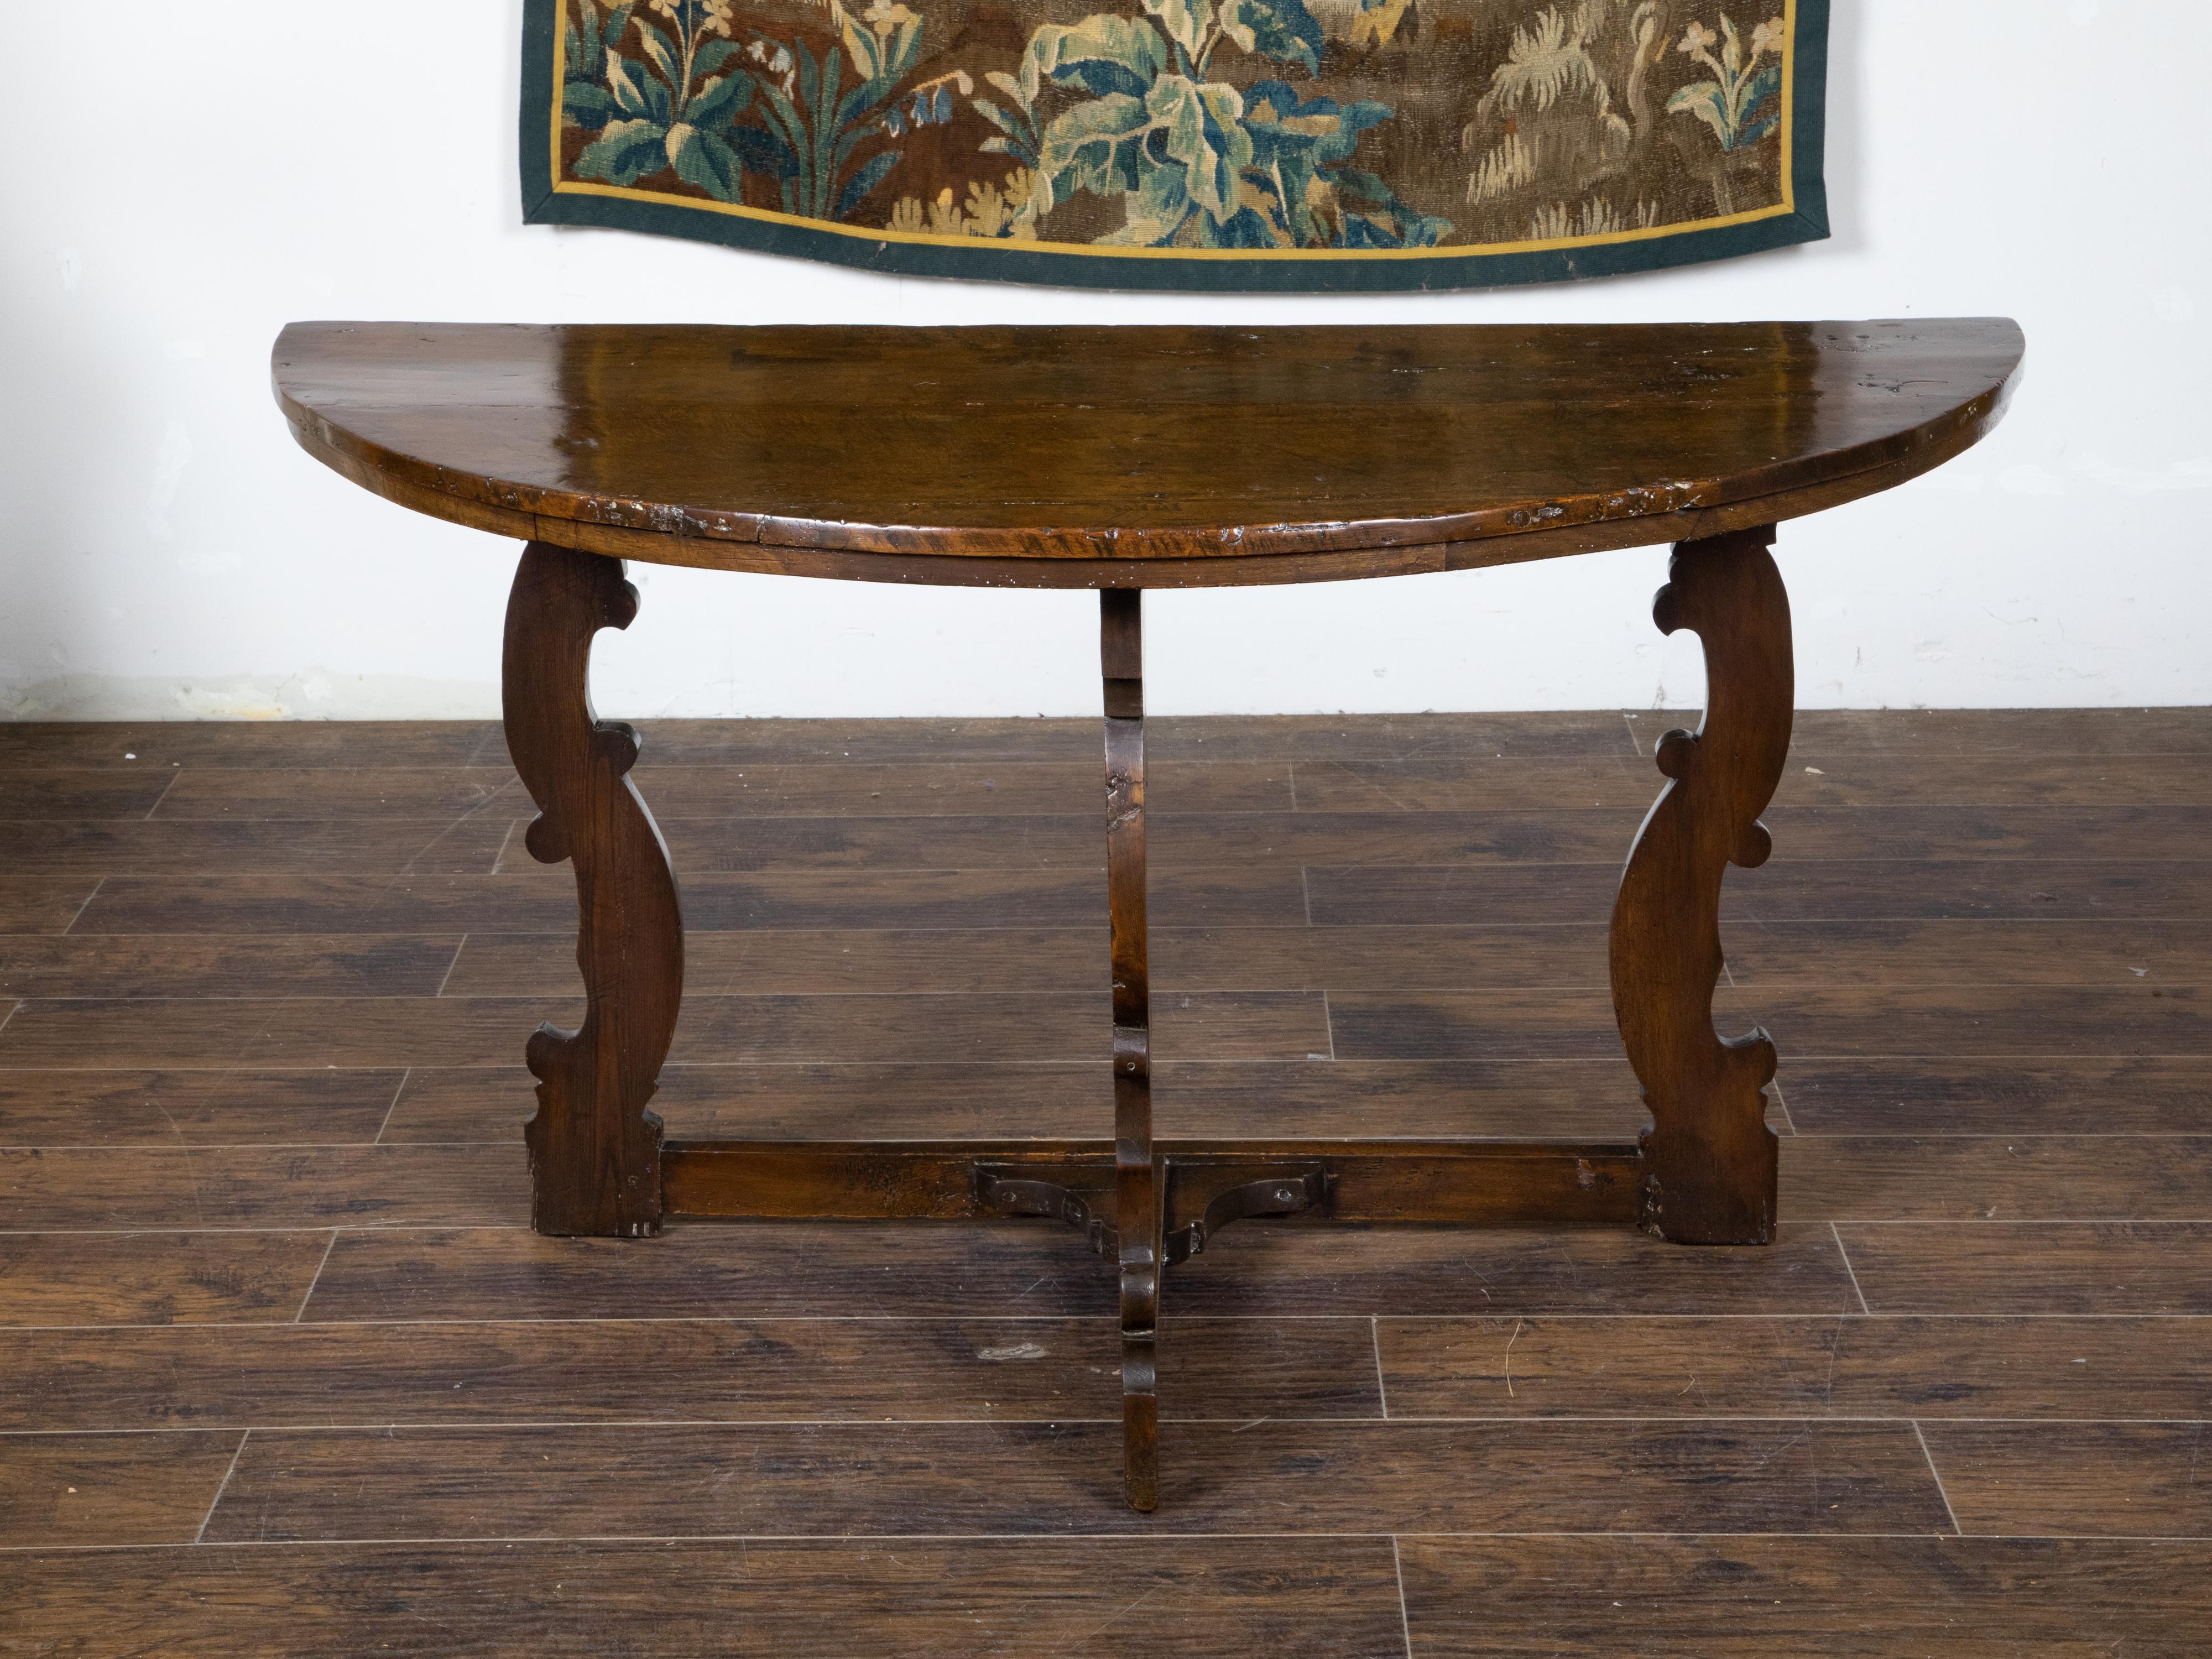 A large Italian Baroque style dark walnut demi lune console table from the 18th century, with semi-circular top, carved legs and cross stretcher. Created in Italy during the 18th century, this walnut demi lune table features a semi-circular planked